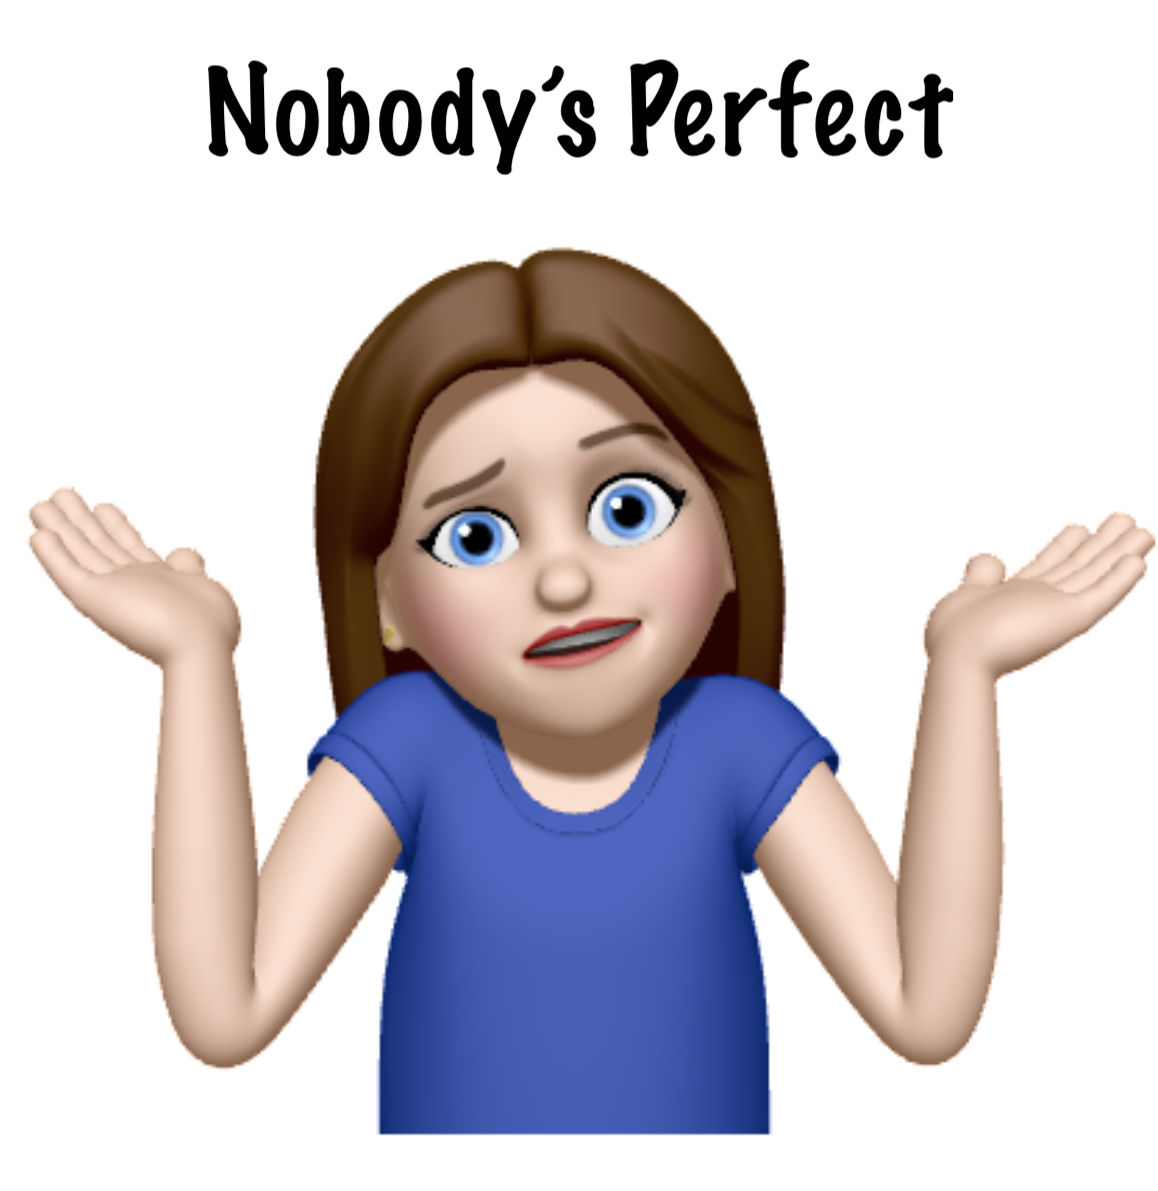 Image of person shrugging with text over the image that says "Nobody's Perfect"